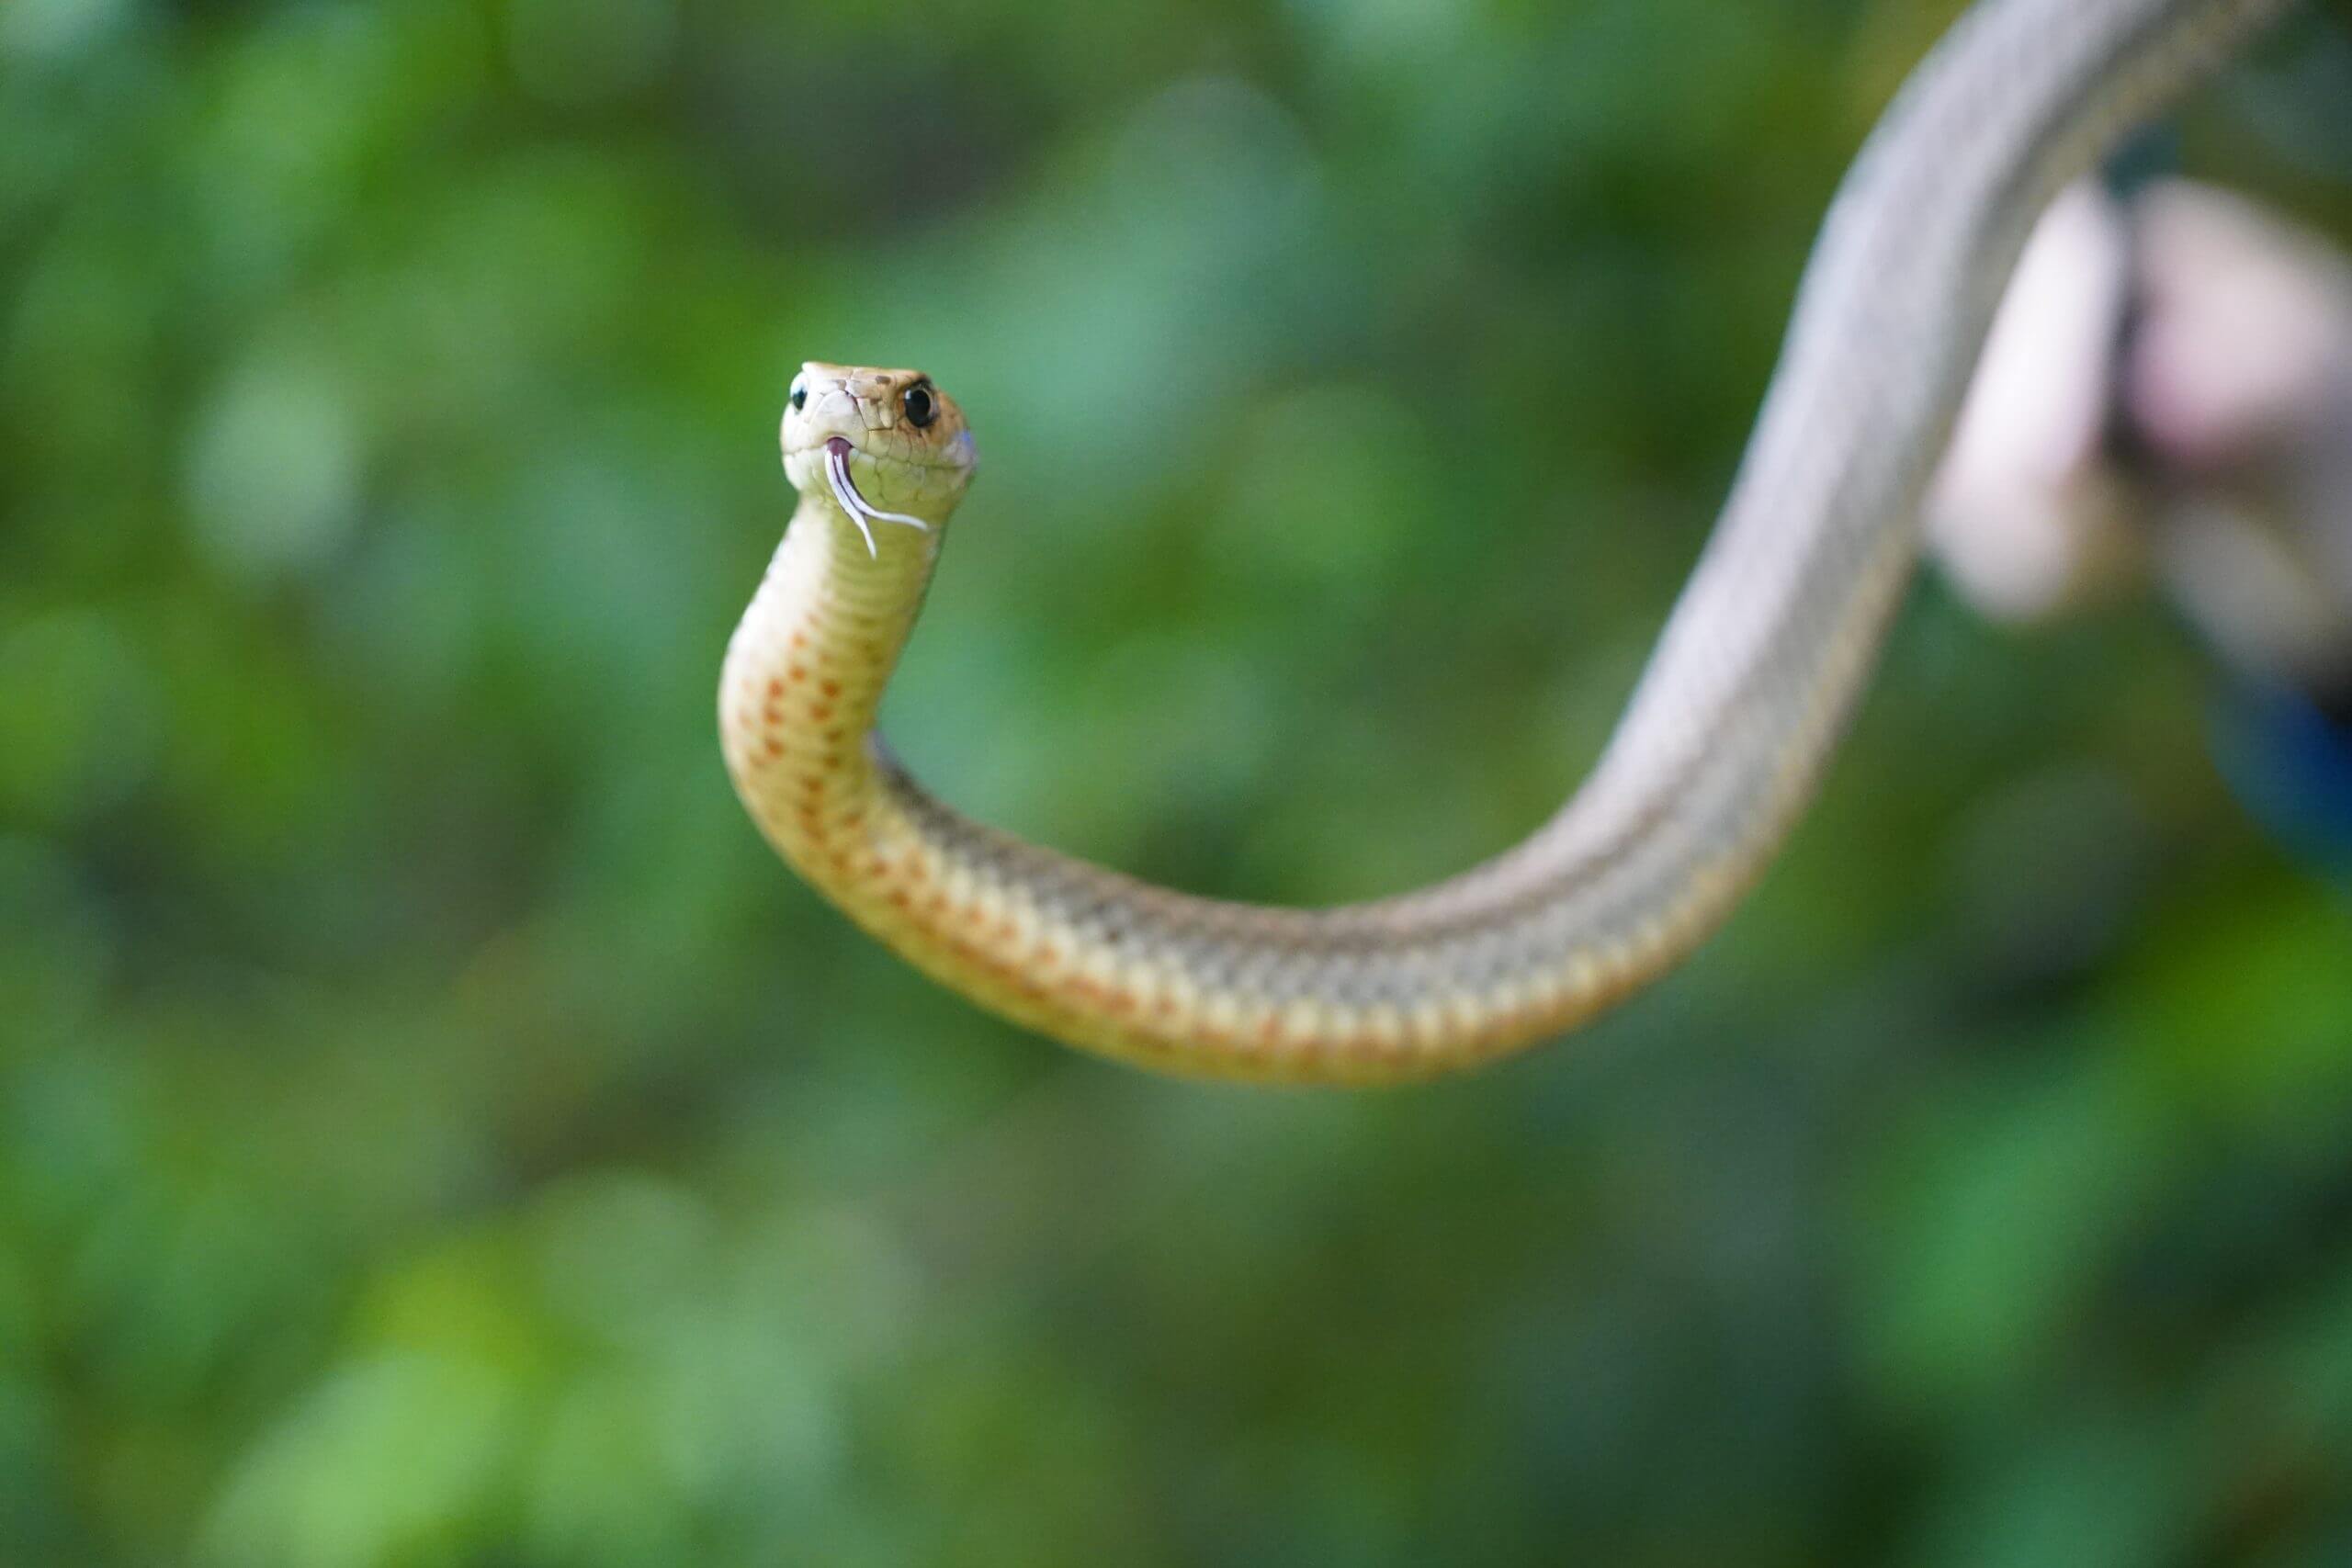 Eastern Brown snake looking with tongue out